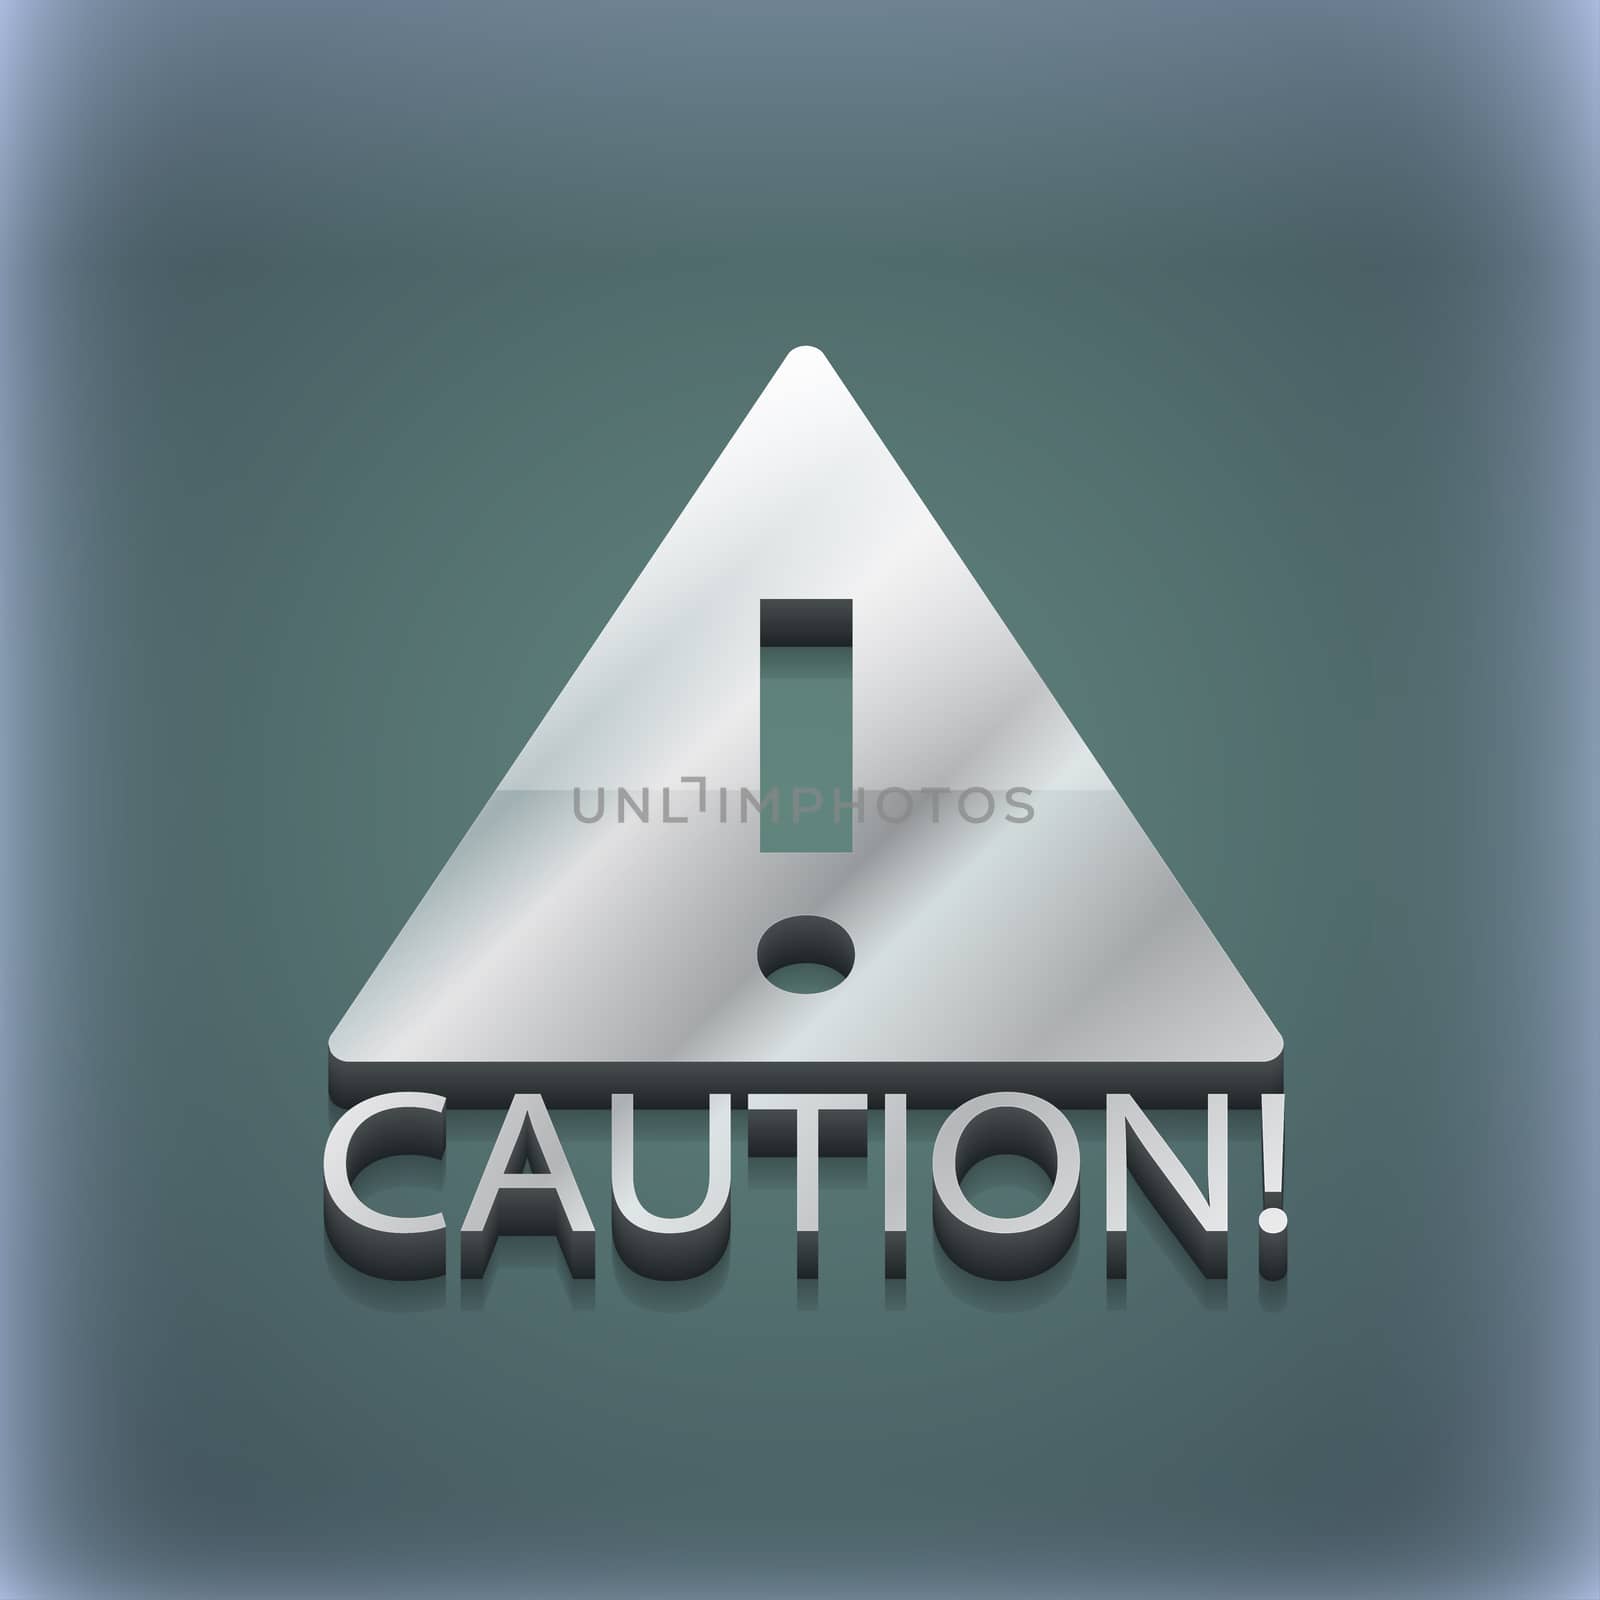 Attention caution icon symbol. 3D style. Trendy, modern design with space for your text illustration. Raster version